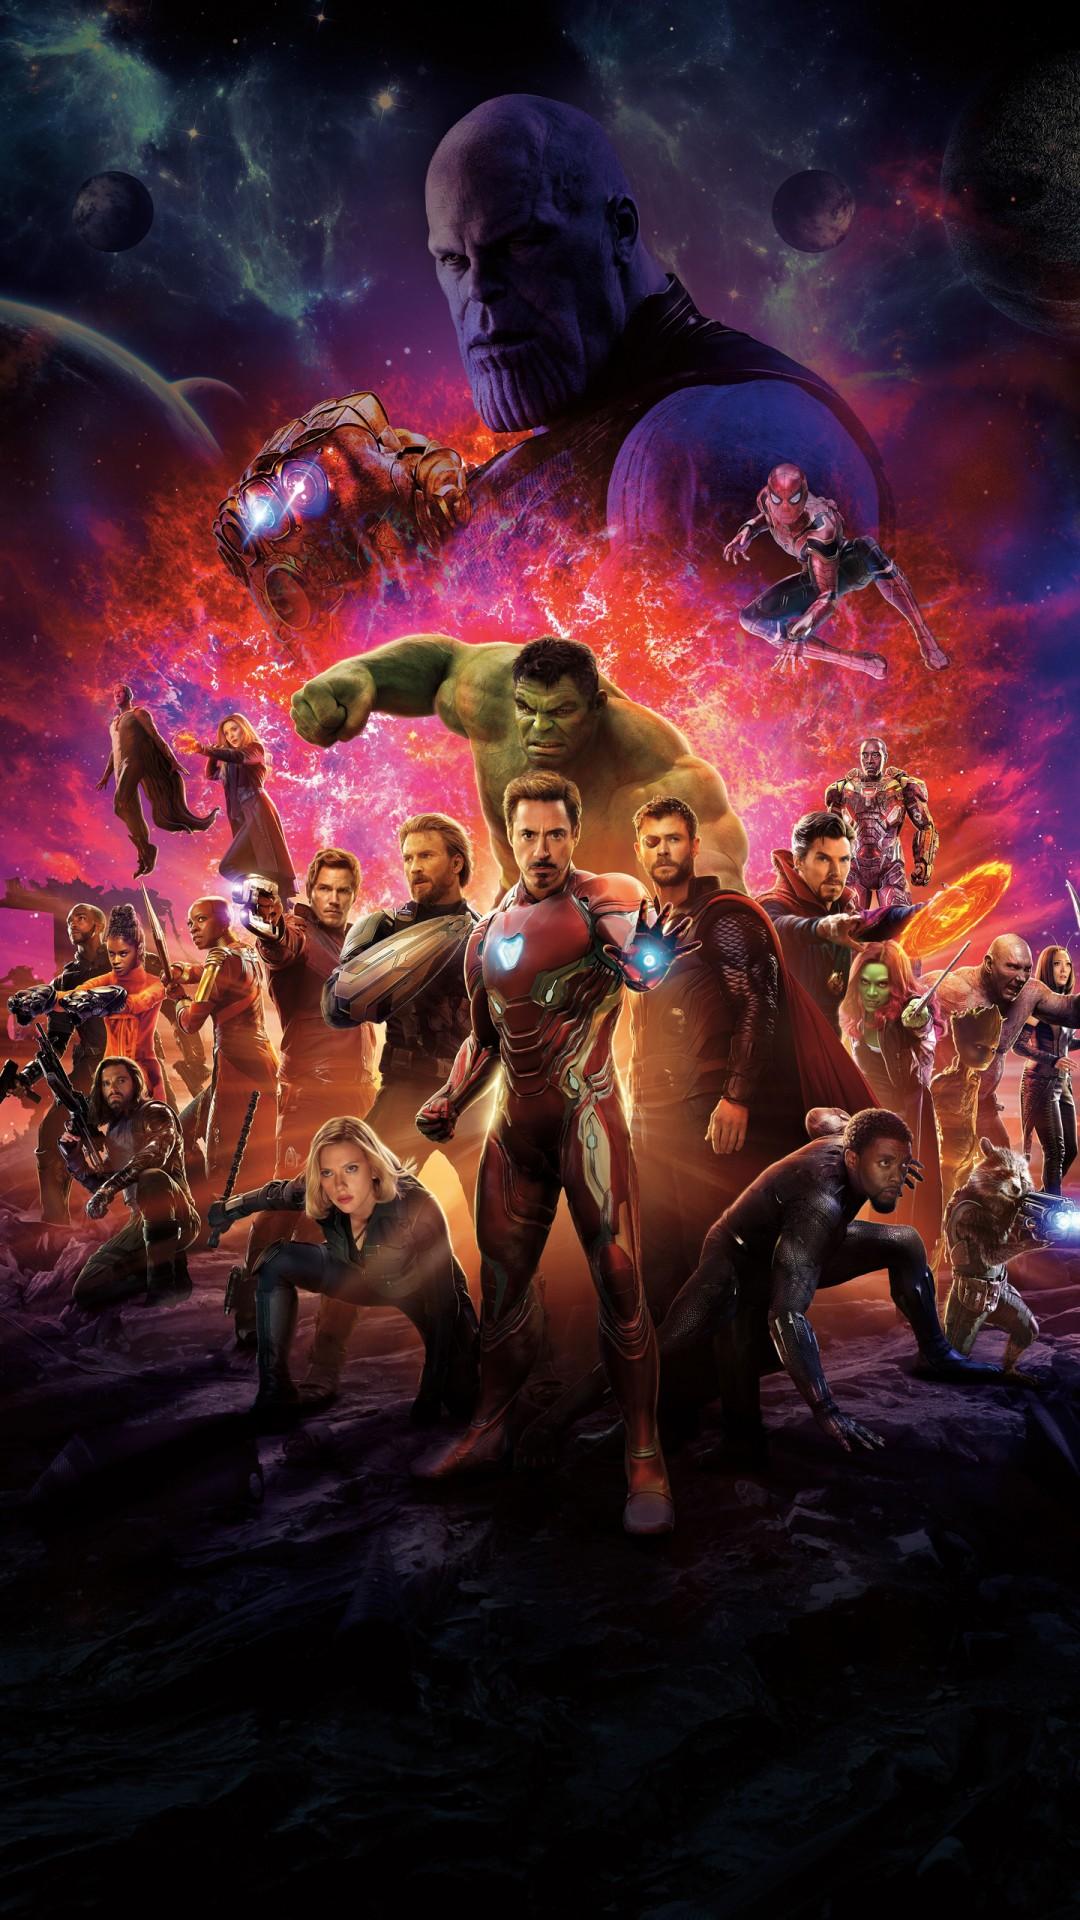 Infinity war Heroes 4k wallpaper for iPhone and Android